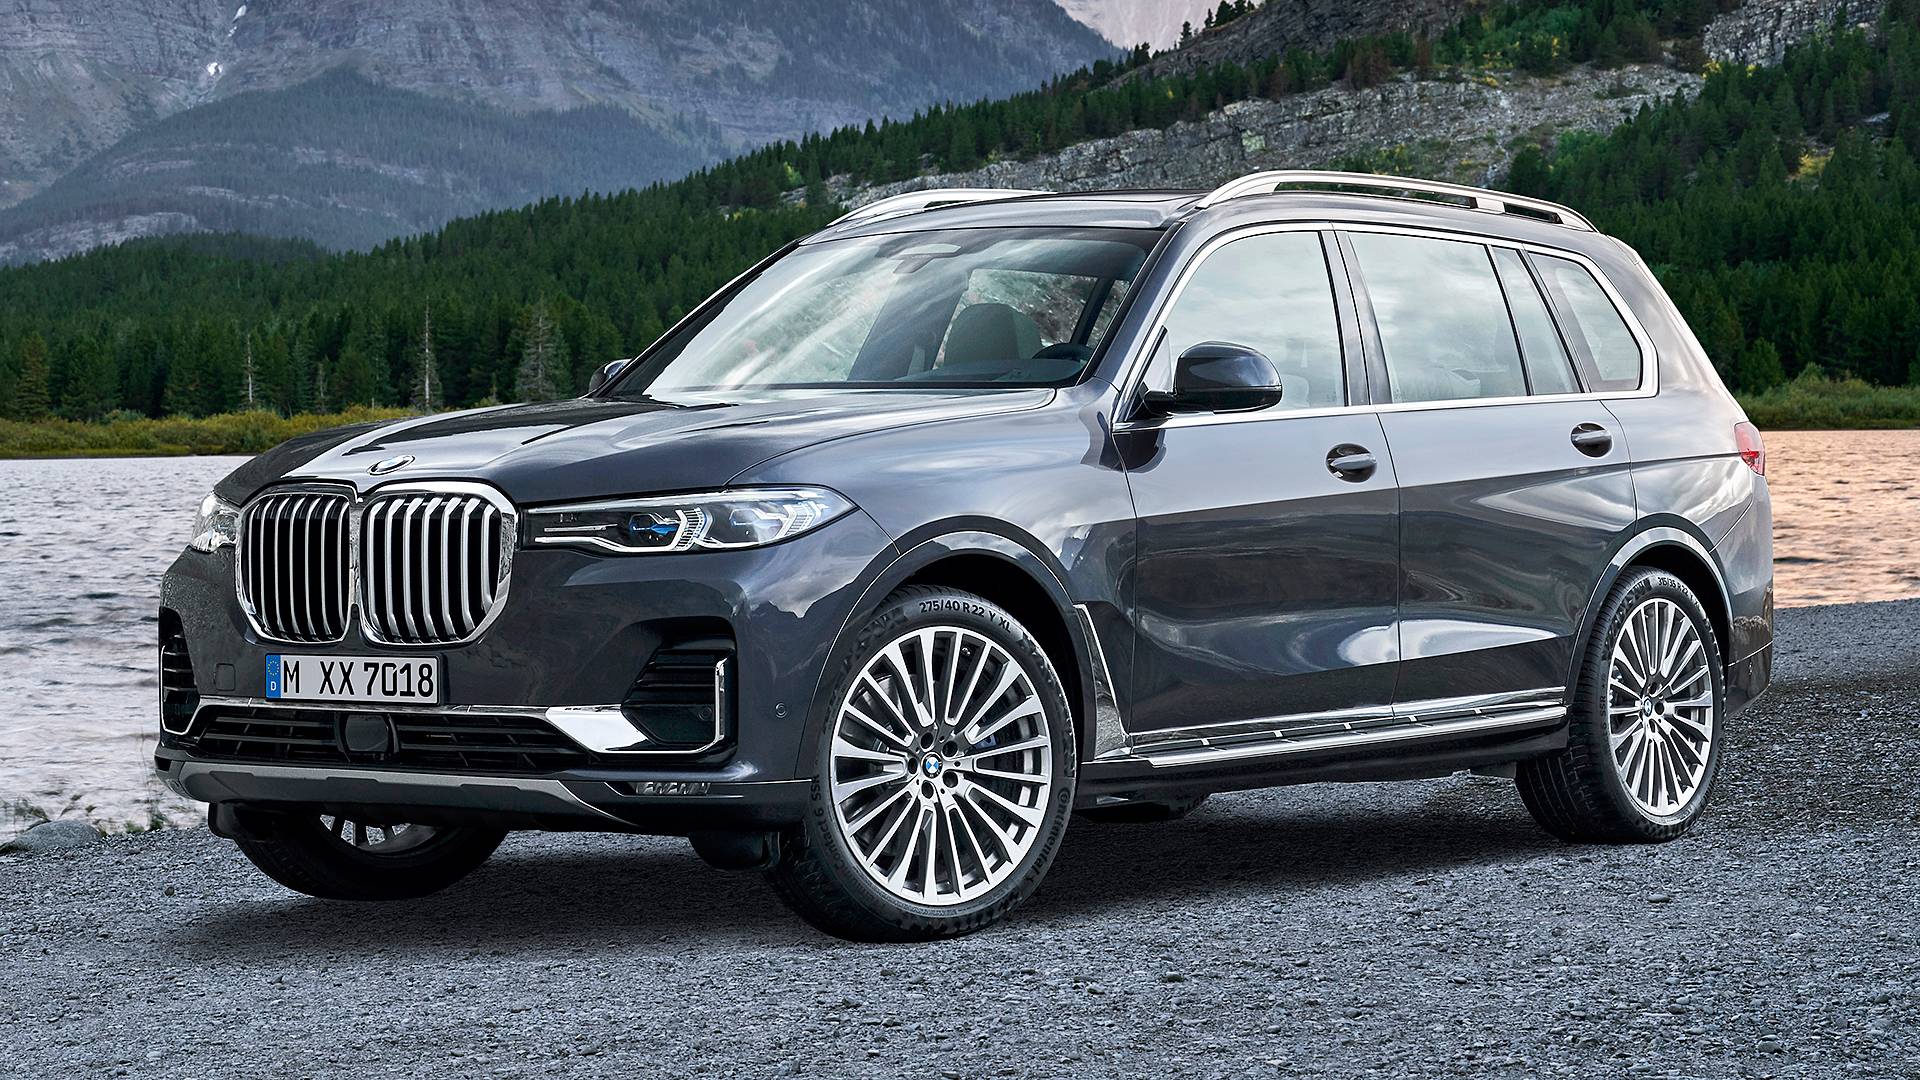 BMW X7 News and Reviews